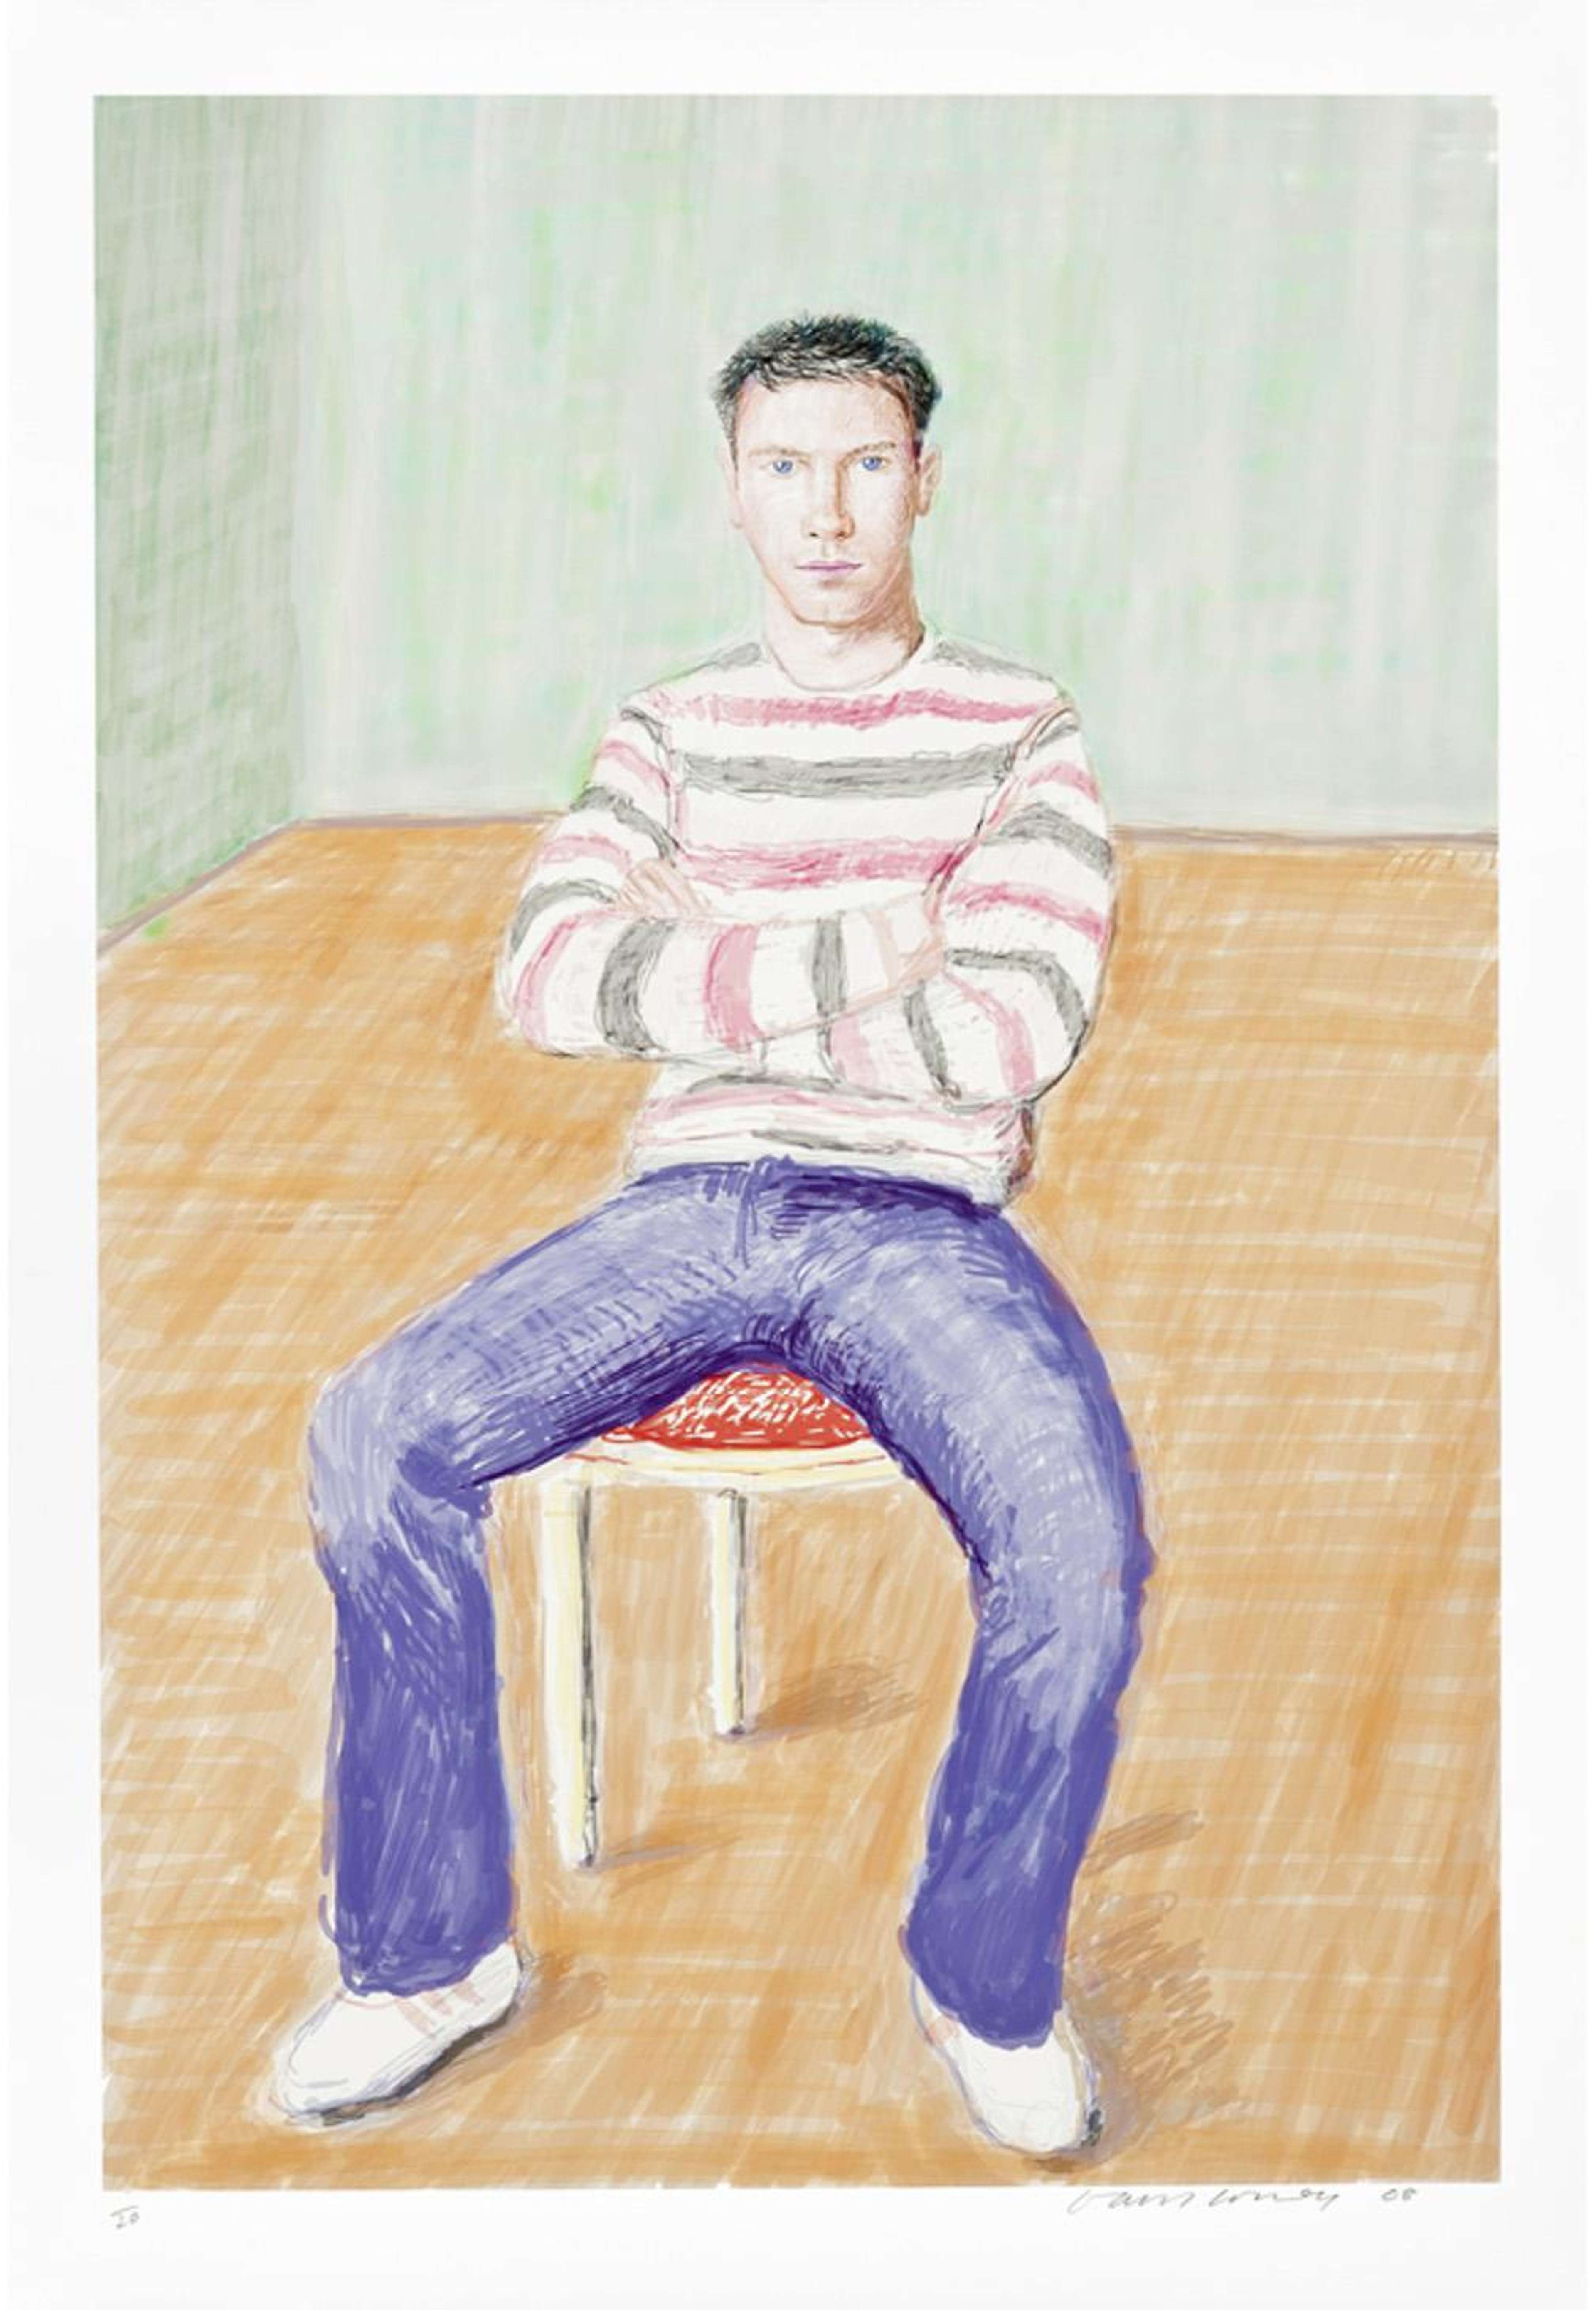 A digital print by David Hockney depicting a man wearing jeans and a striped long sleeve t-shirt, arms folded and gazing directly out at the viewer, sitting on a chair in a room with green walls and a wooden floor